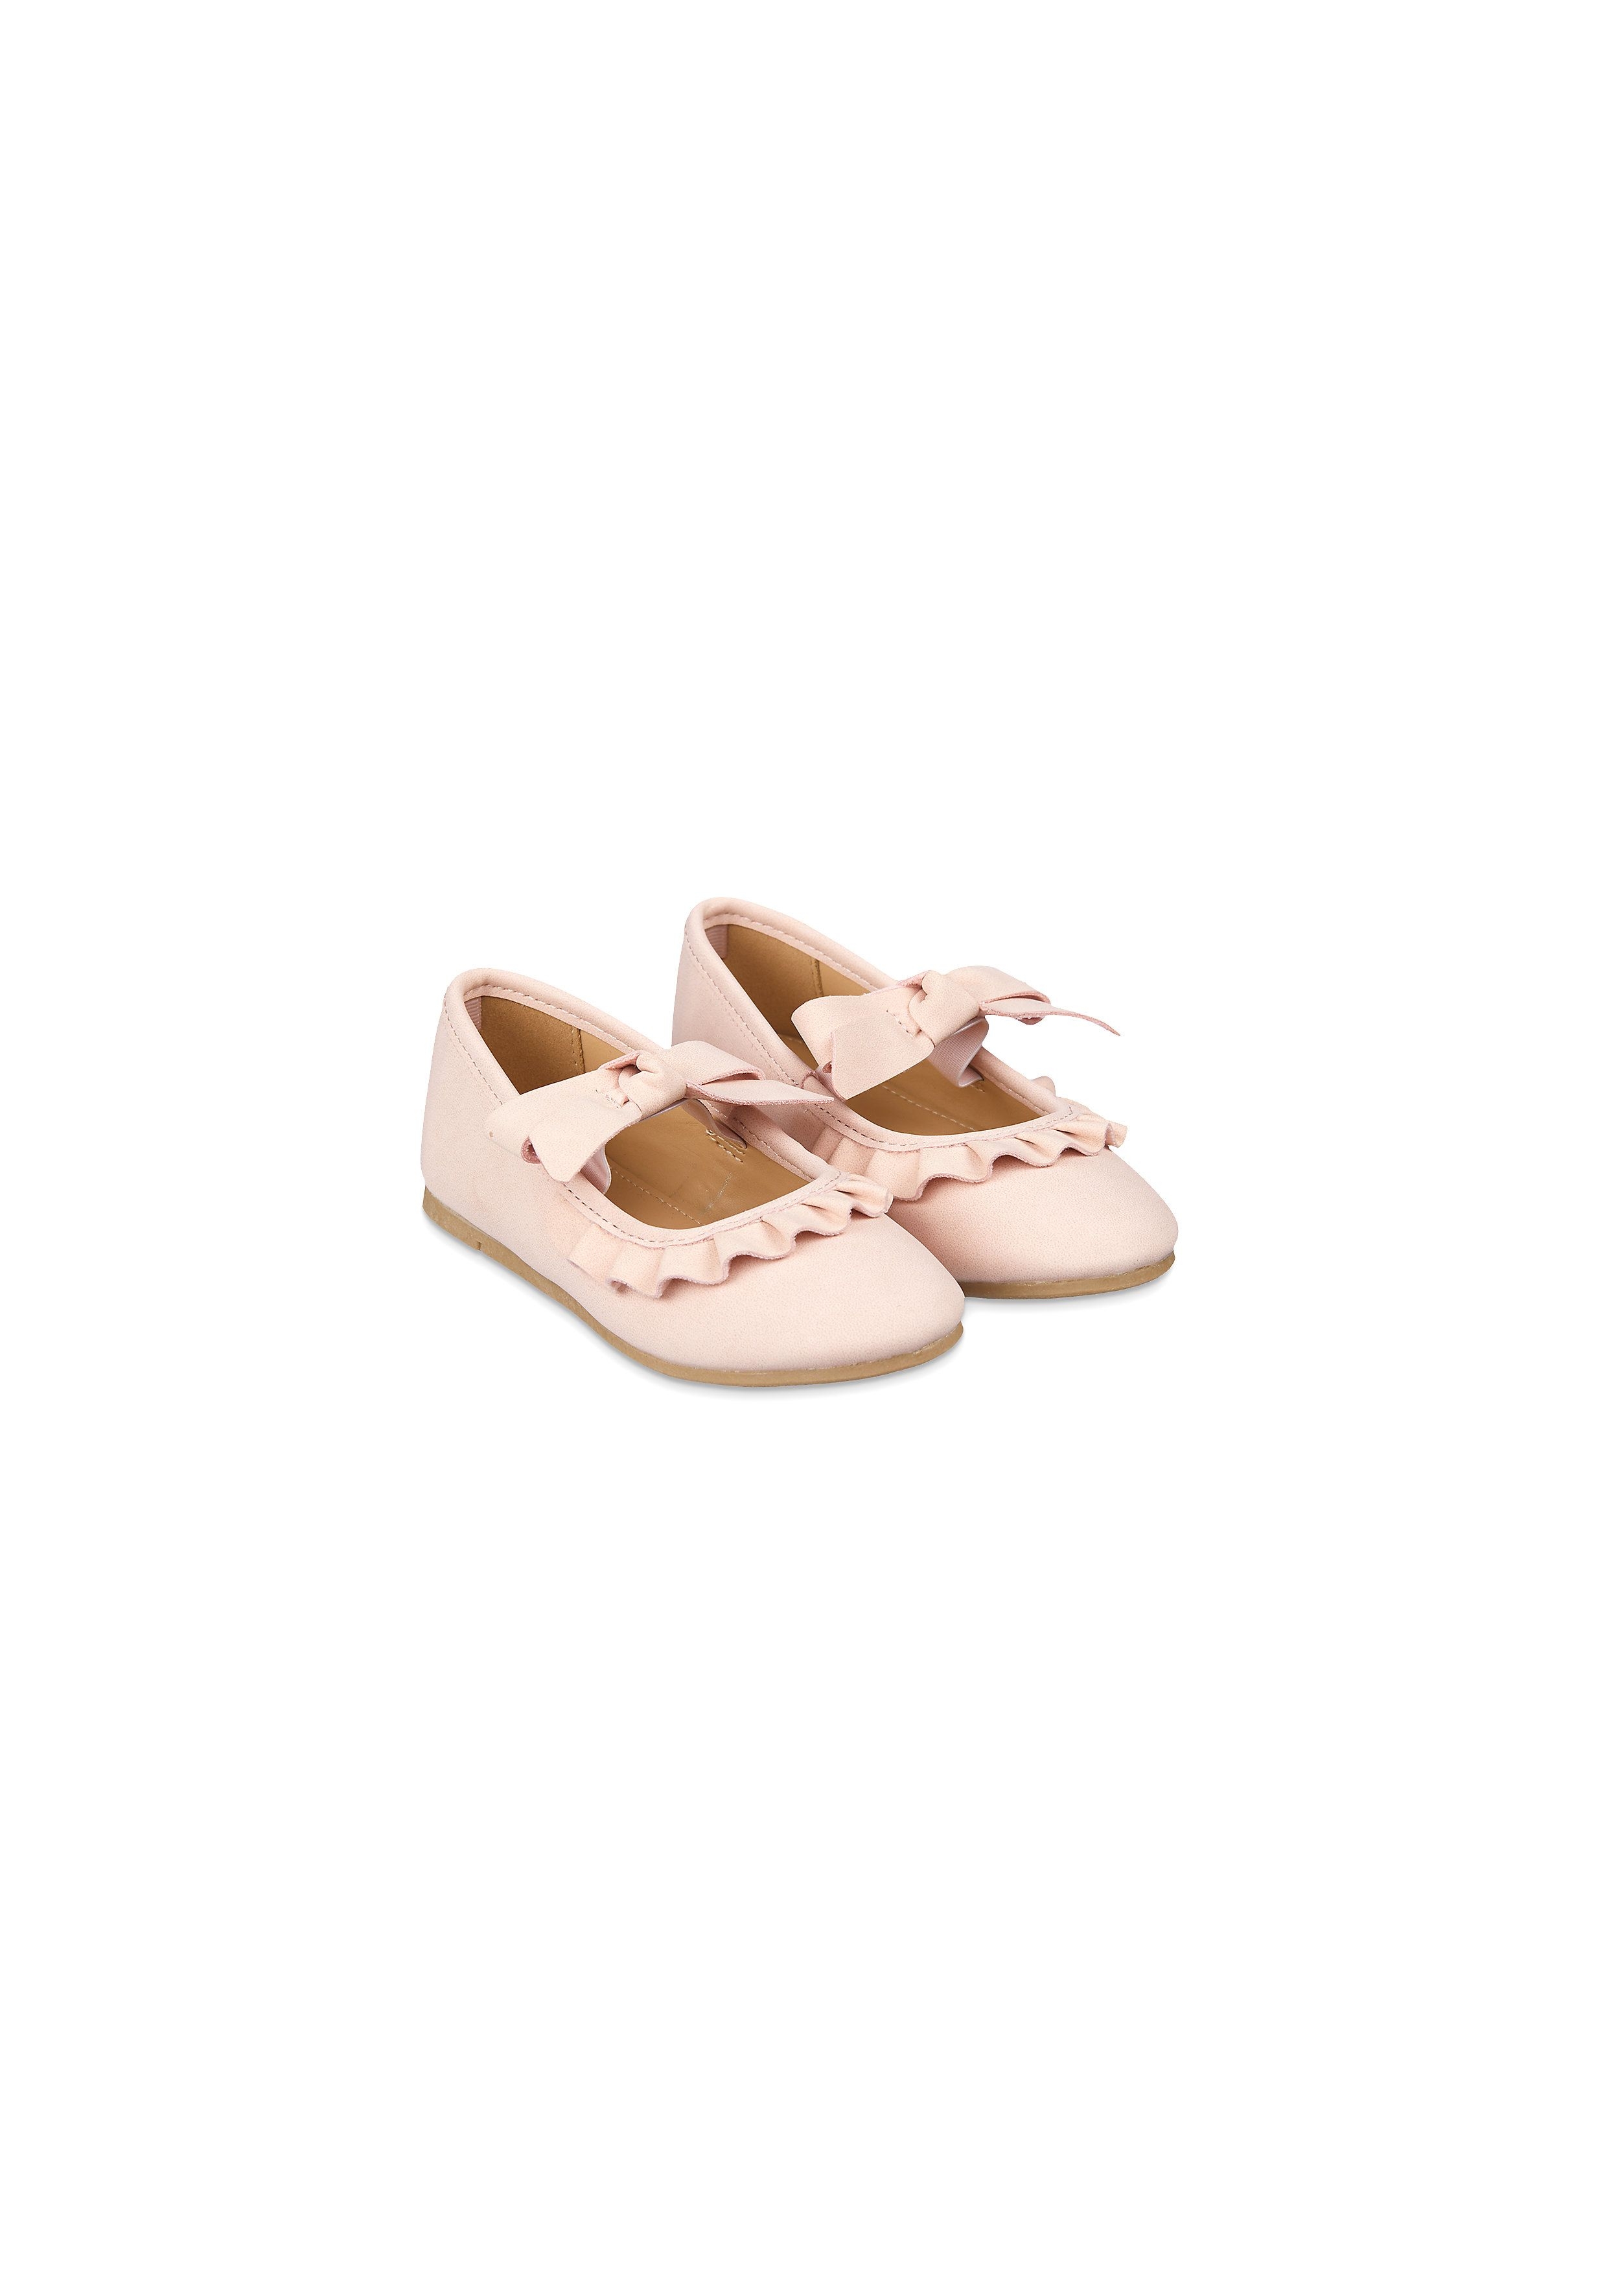 Mothercare | Girls Ballerinas Bow And Frill Detail - Pink 0